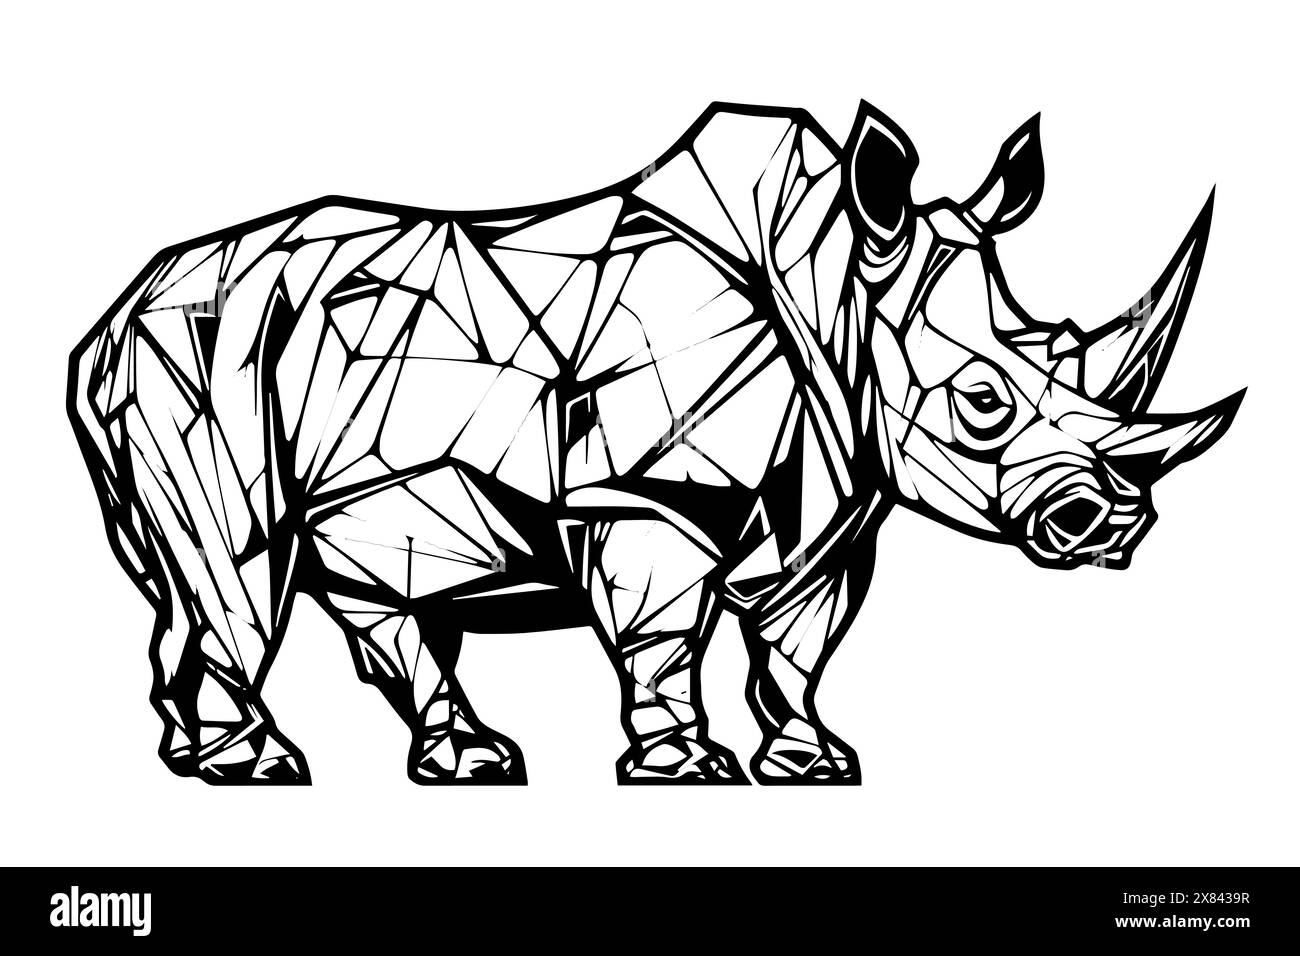 Rhino, geometric tatoo art. Engraved lined style with bold lines. Vector illustration. Stock Vector